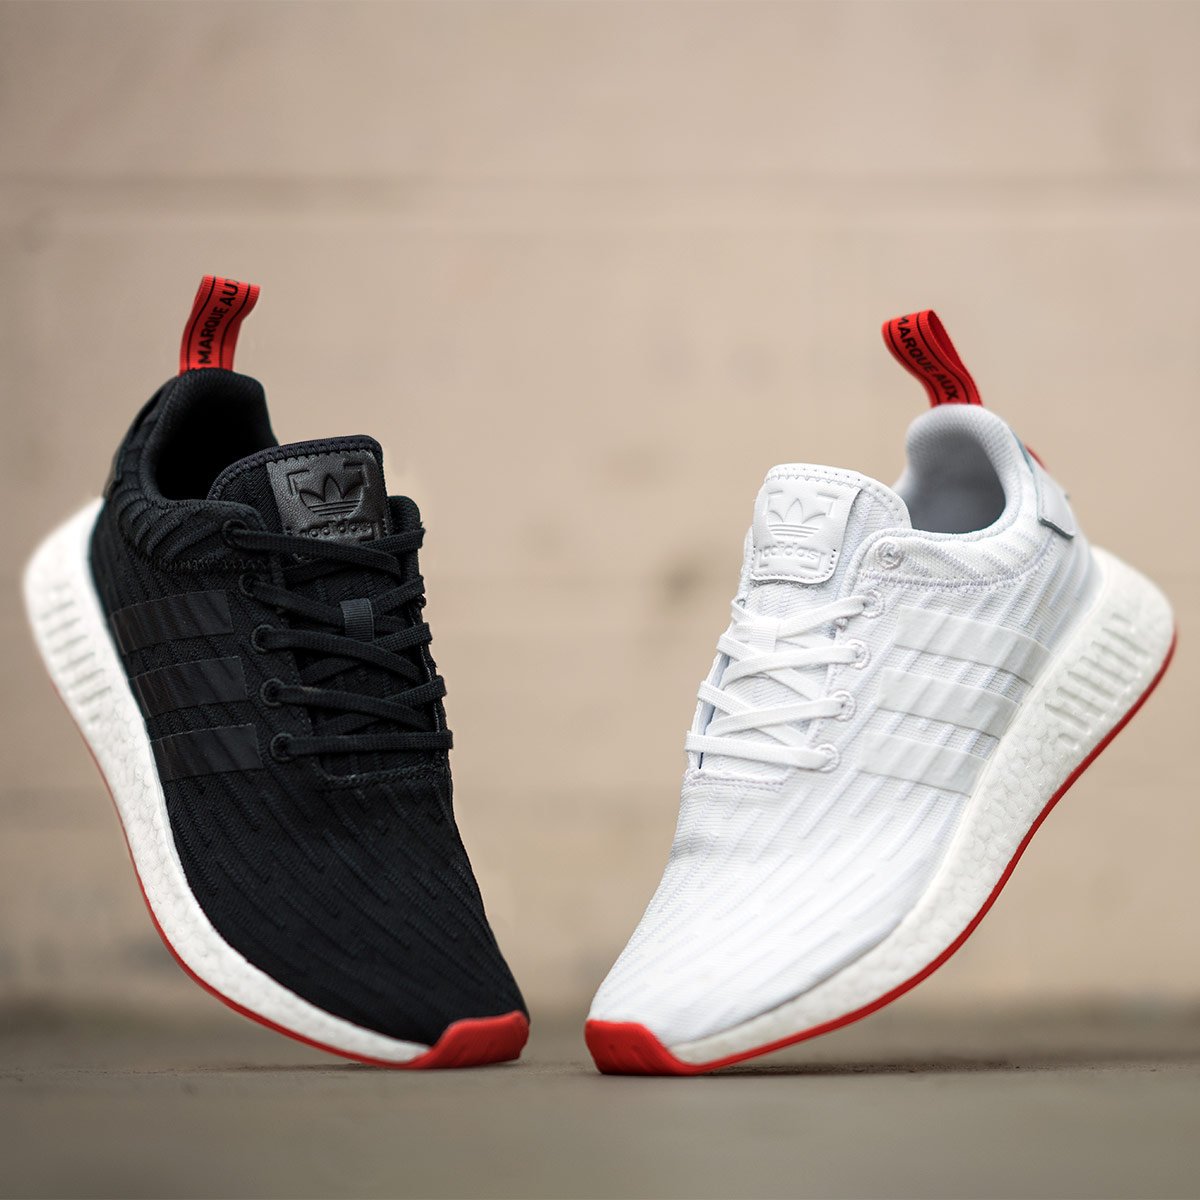 adidas NMD PK Under Retail Shouts